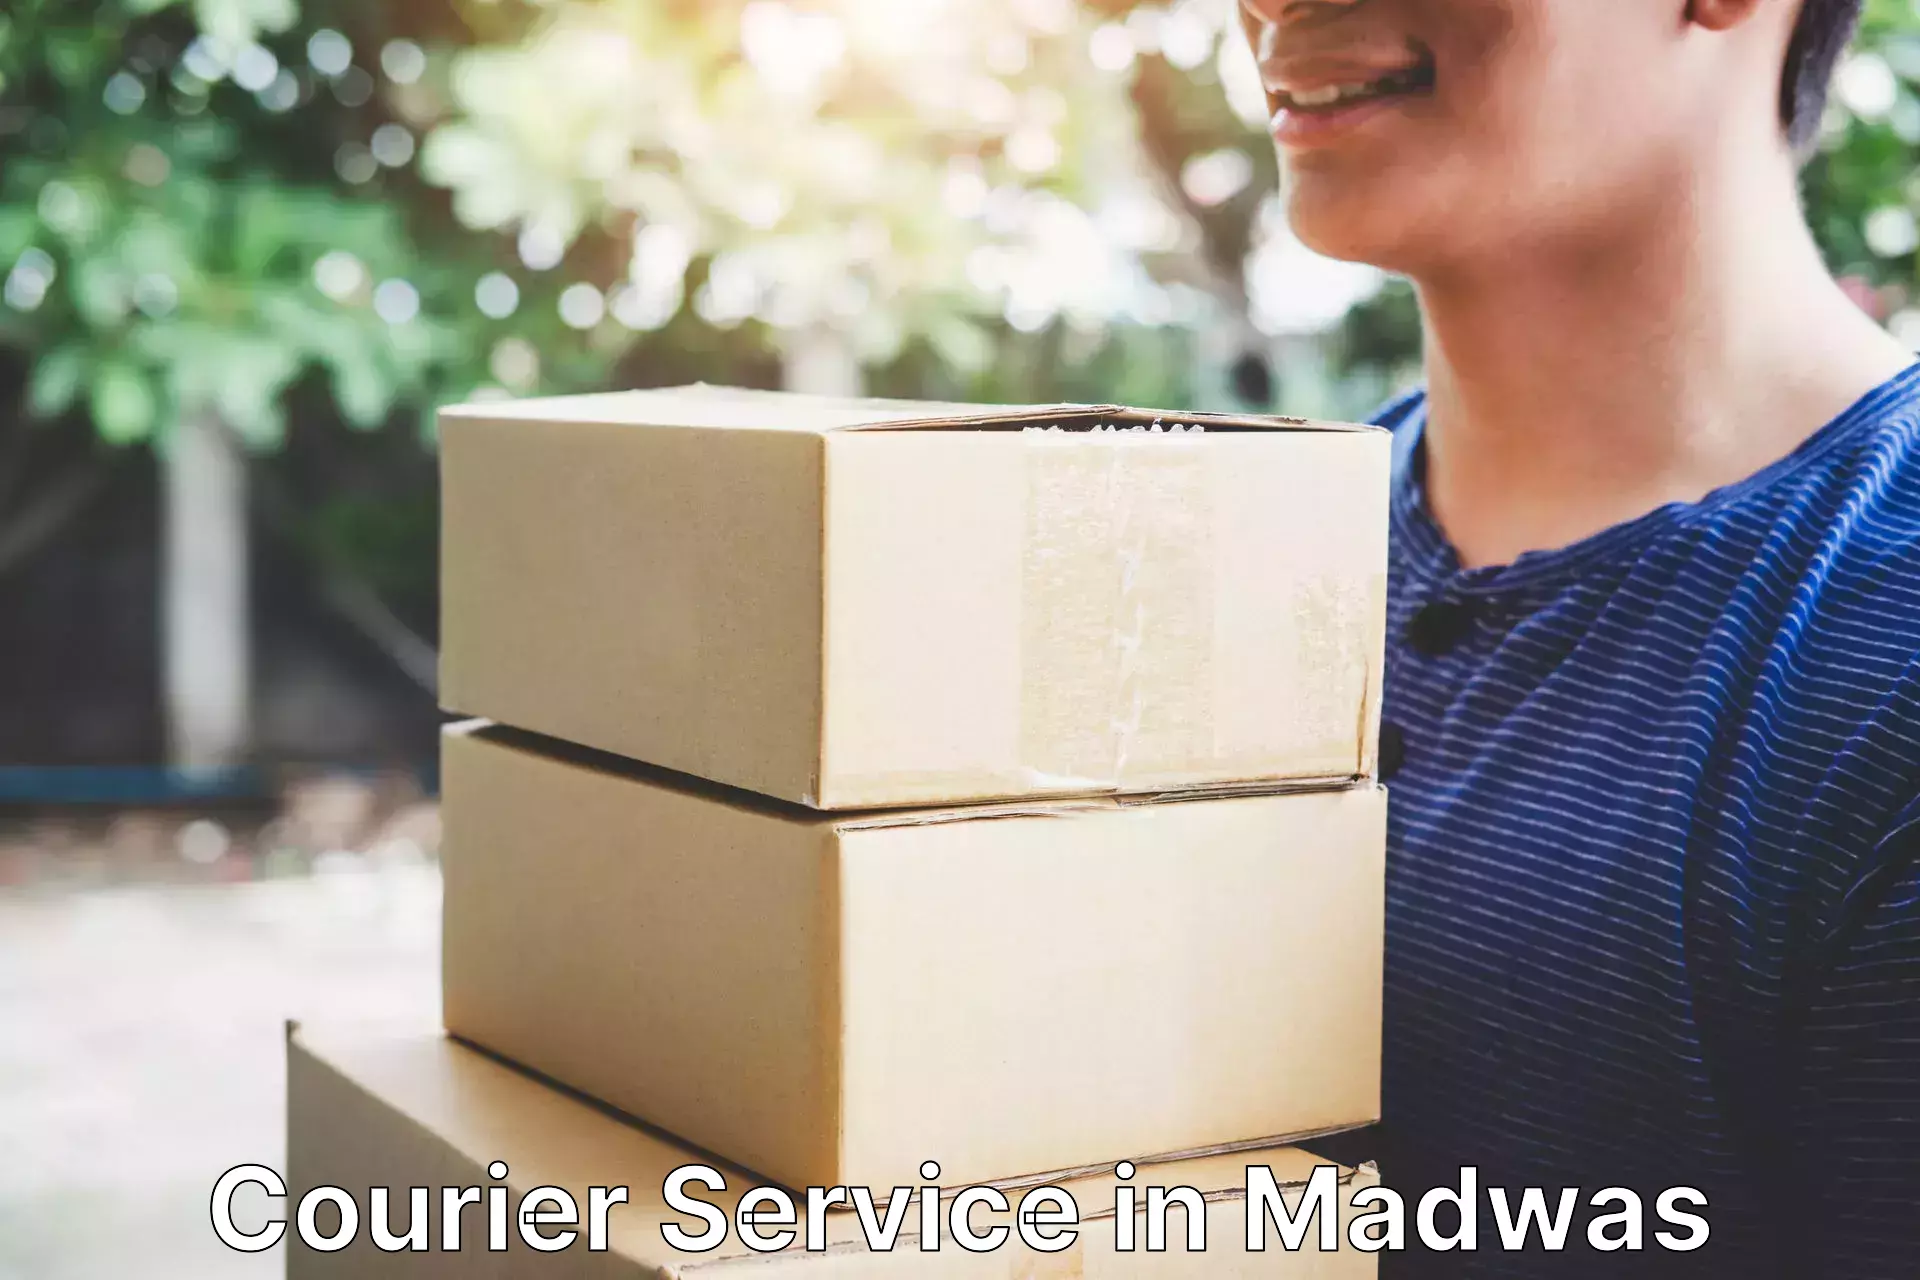 Personal courier services in Madwas